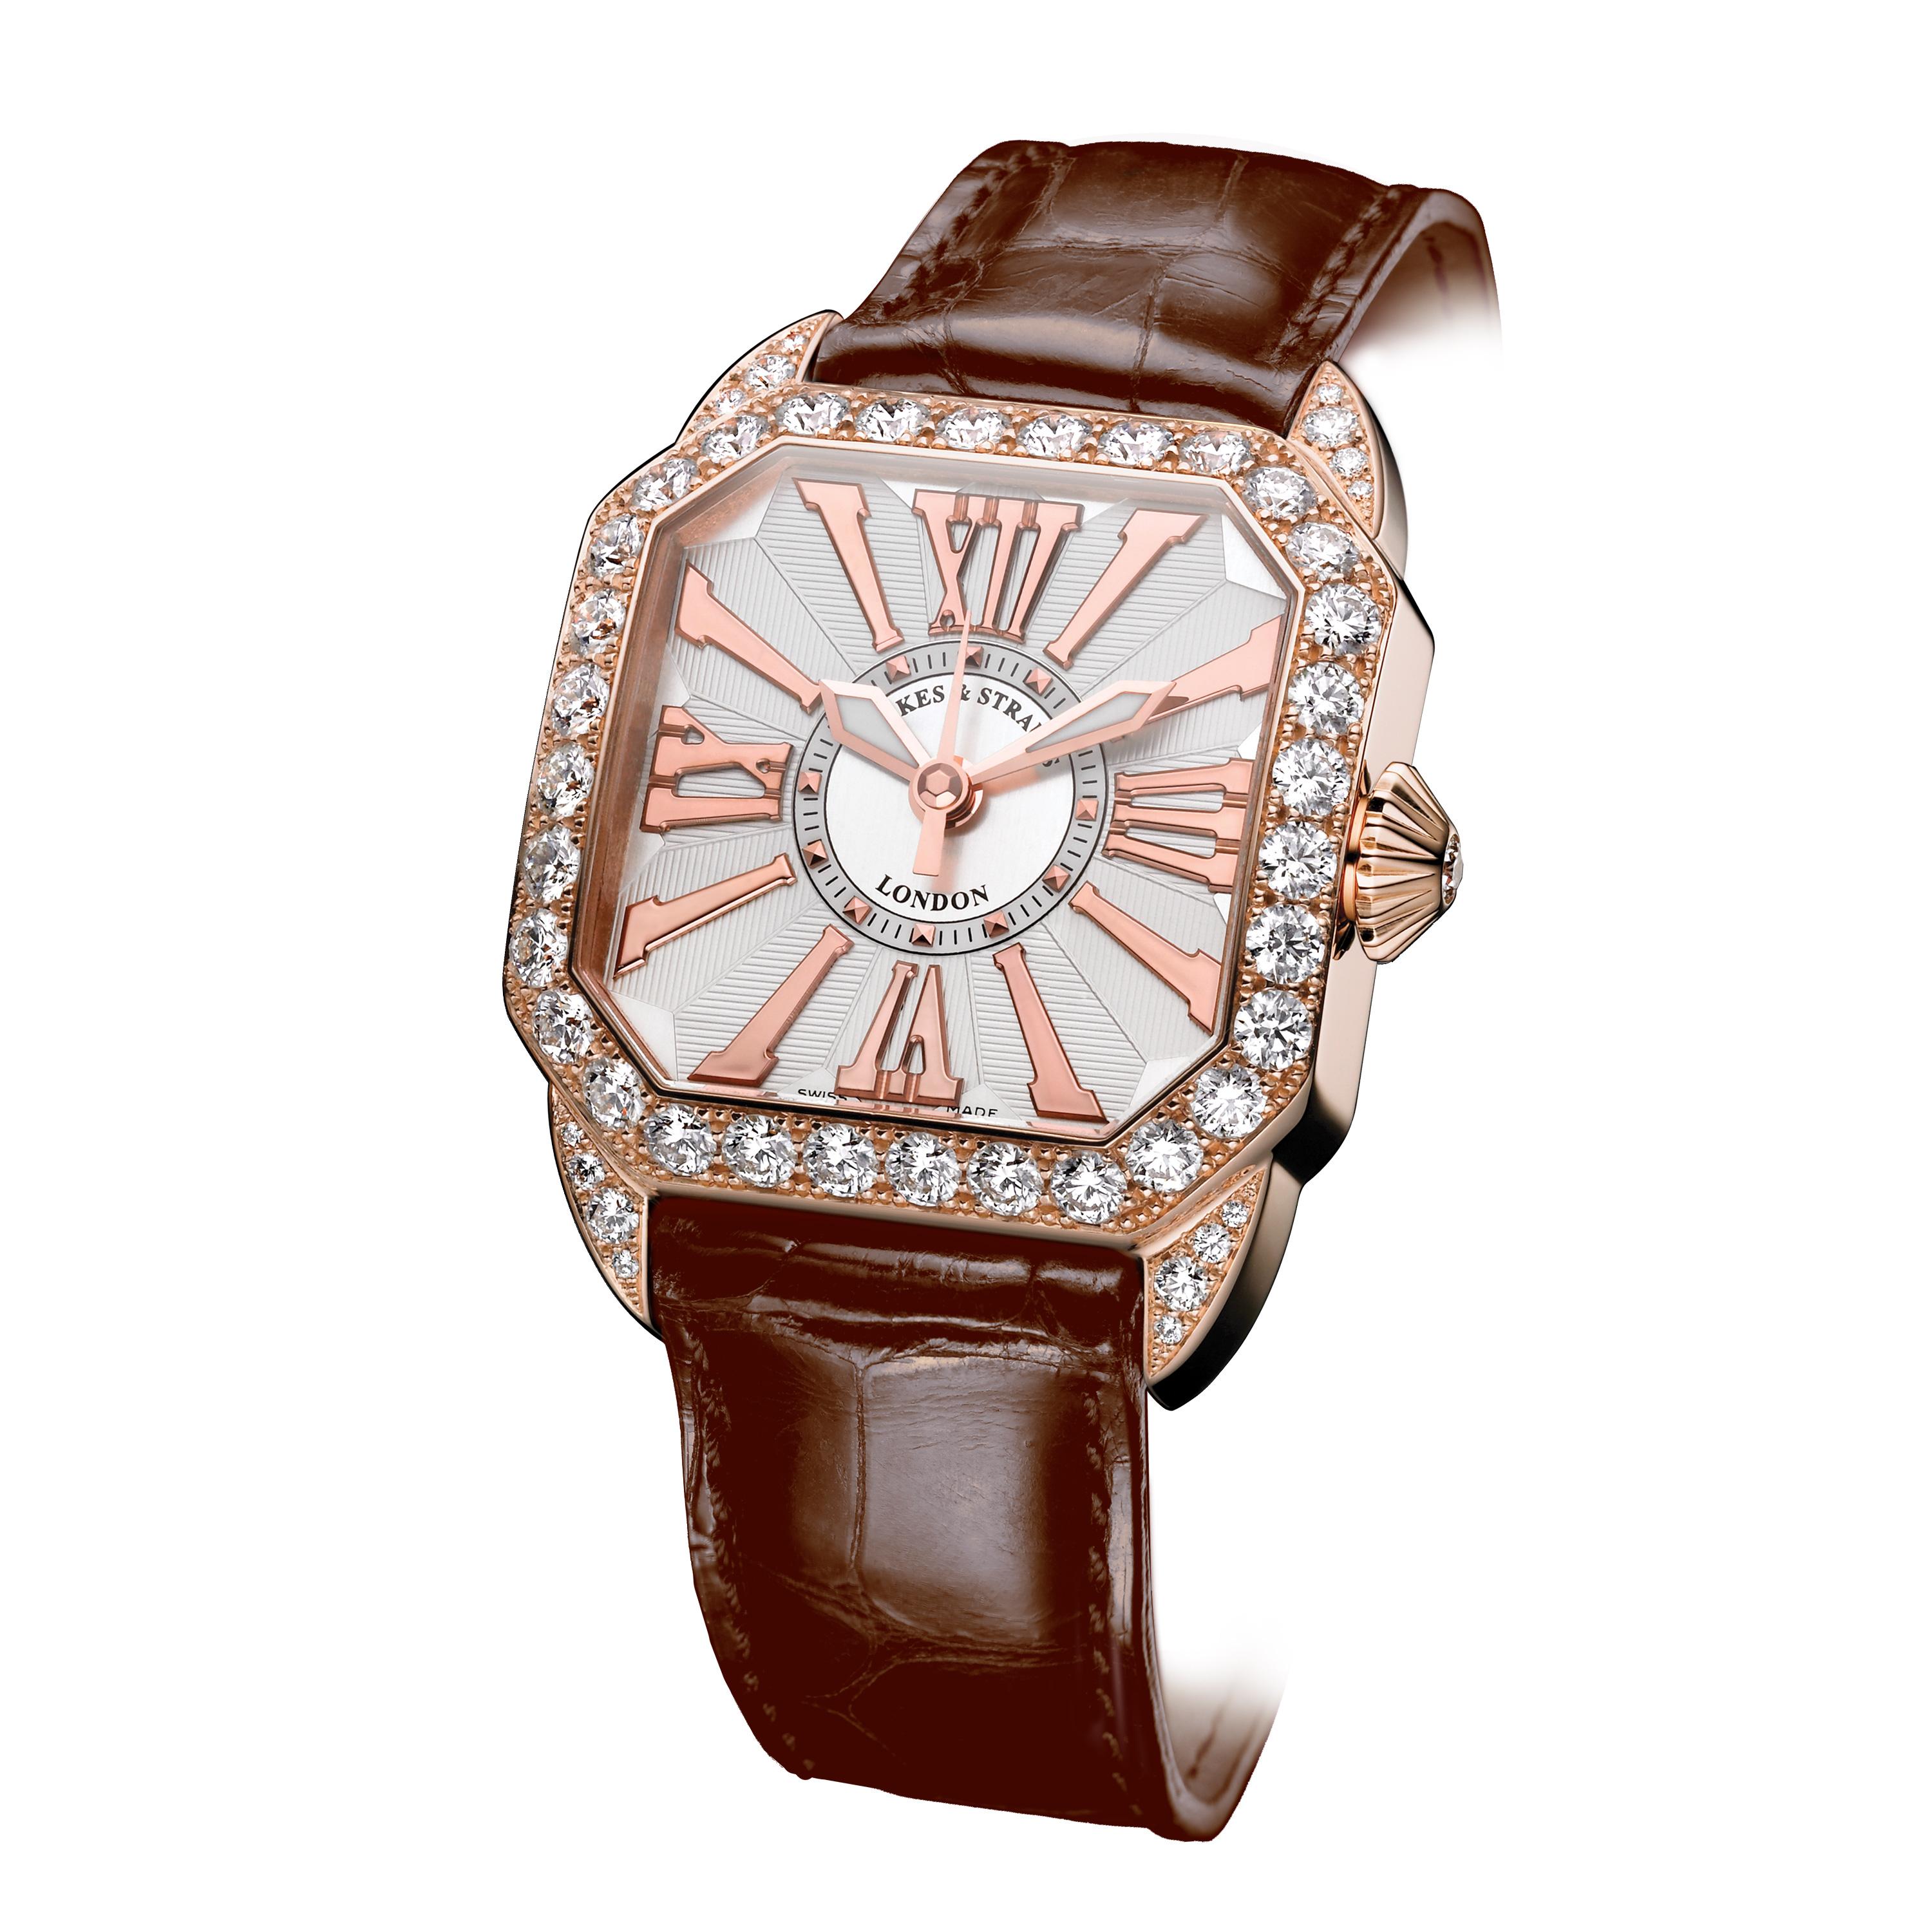 Berkeley 37 is a luxury diamond watch for men and women crafted in 18kt rose gold, featuring the white dial with rose gold Roman numerals, automatic movement. The case, buckle and crown are set with white Ideal Cut diamonds. It is a 37 mm elegant